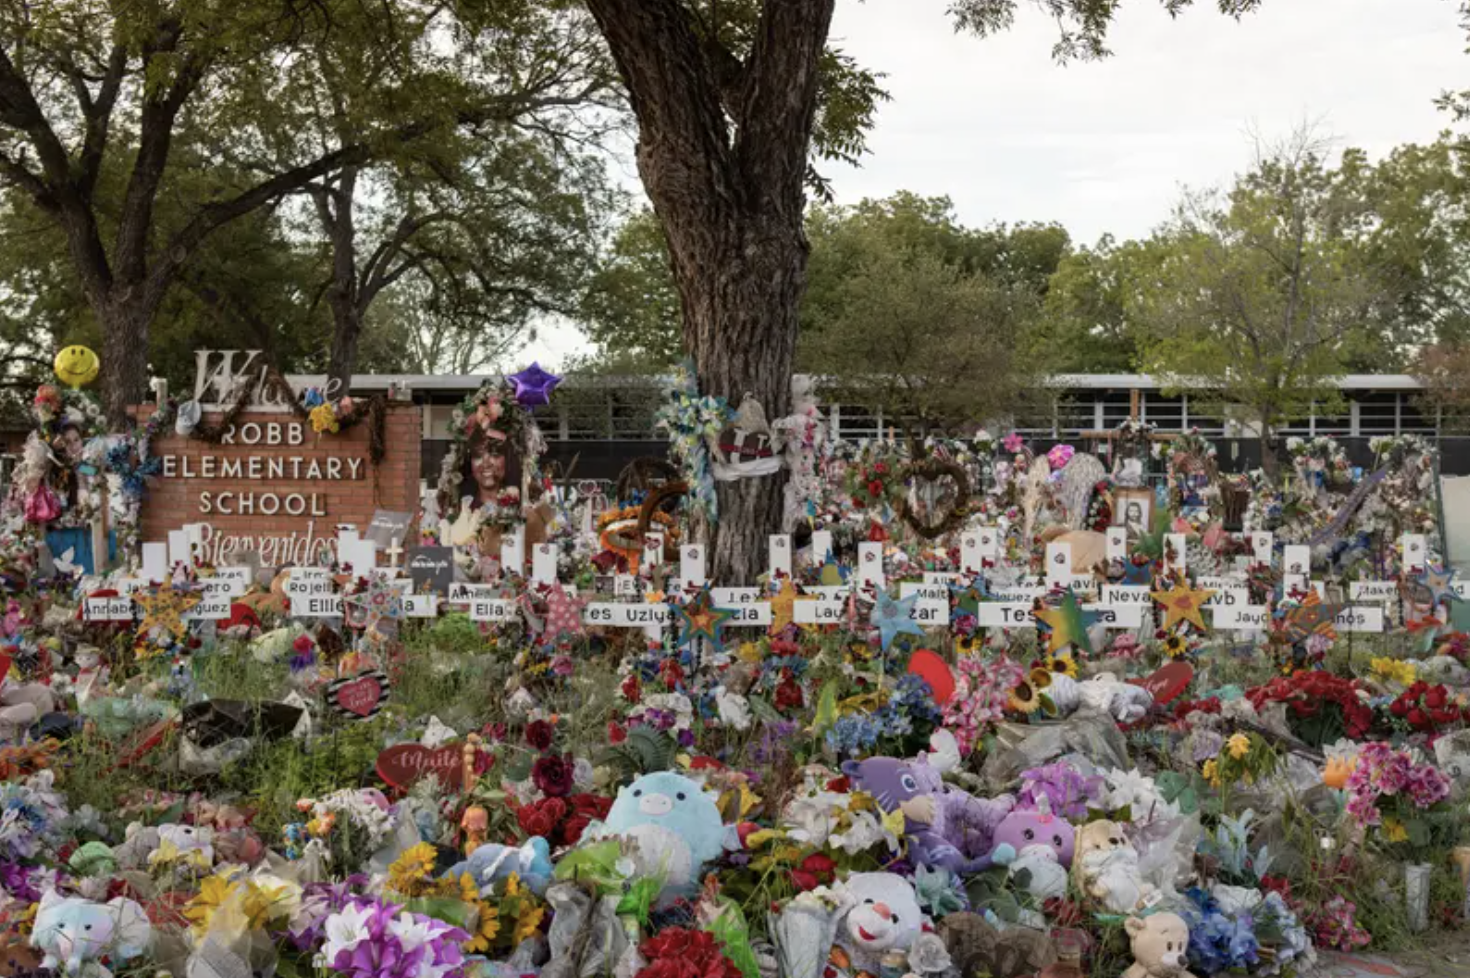 A memorial on a grass lawn filled with flowers and gifts for the student victims of the Uvalde shooting